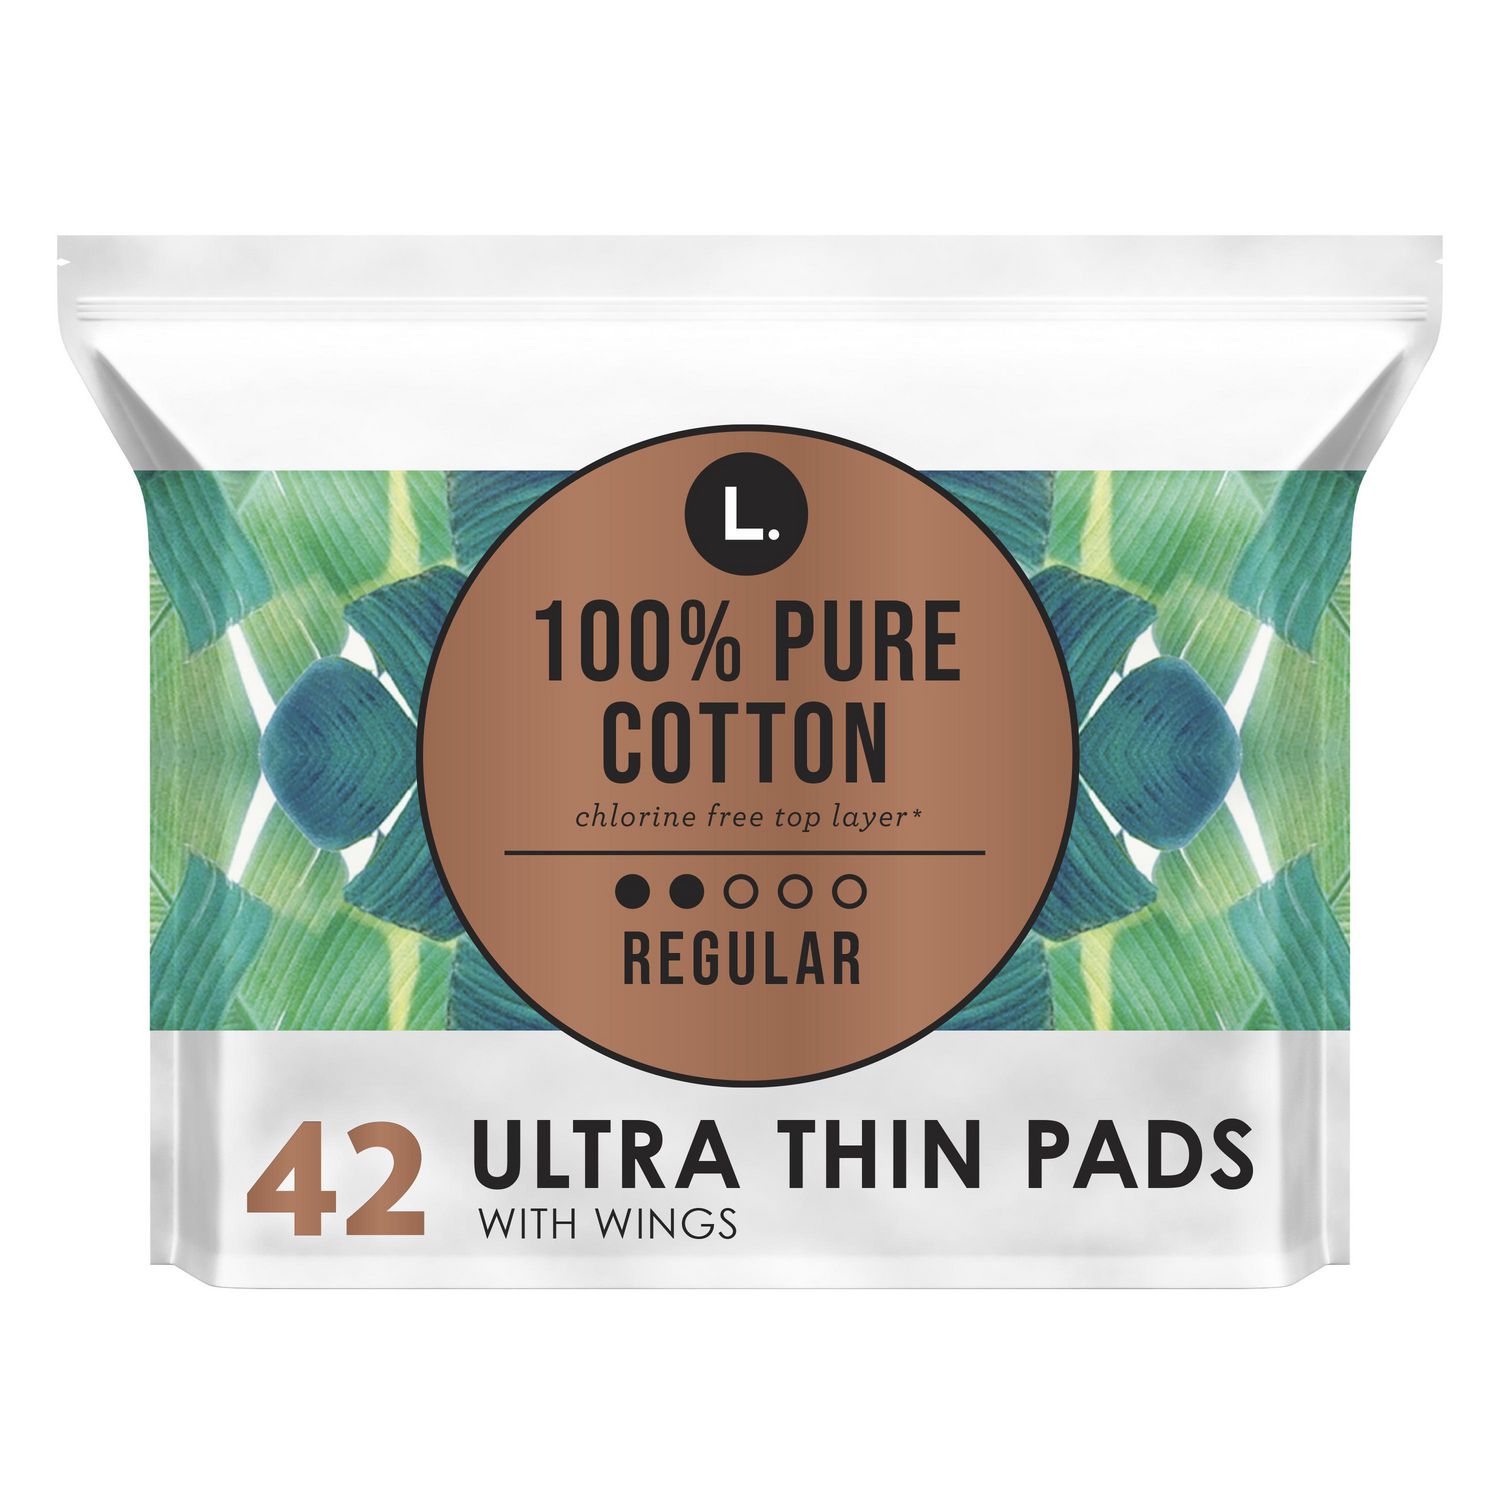 L. Ultra Thin Pads, Overnight Absorbency, 36 Ct, 100% Pure Cotton Top Layer  